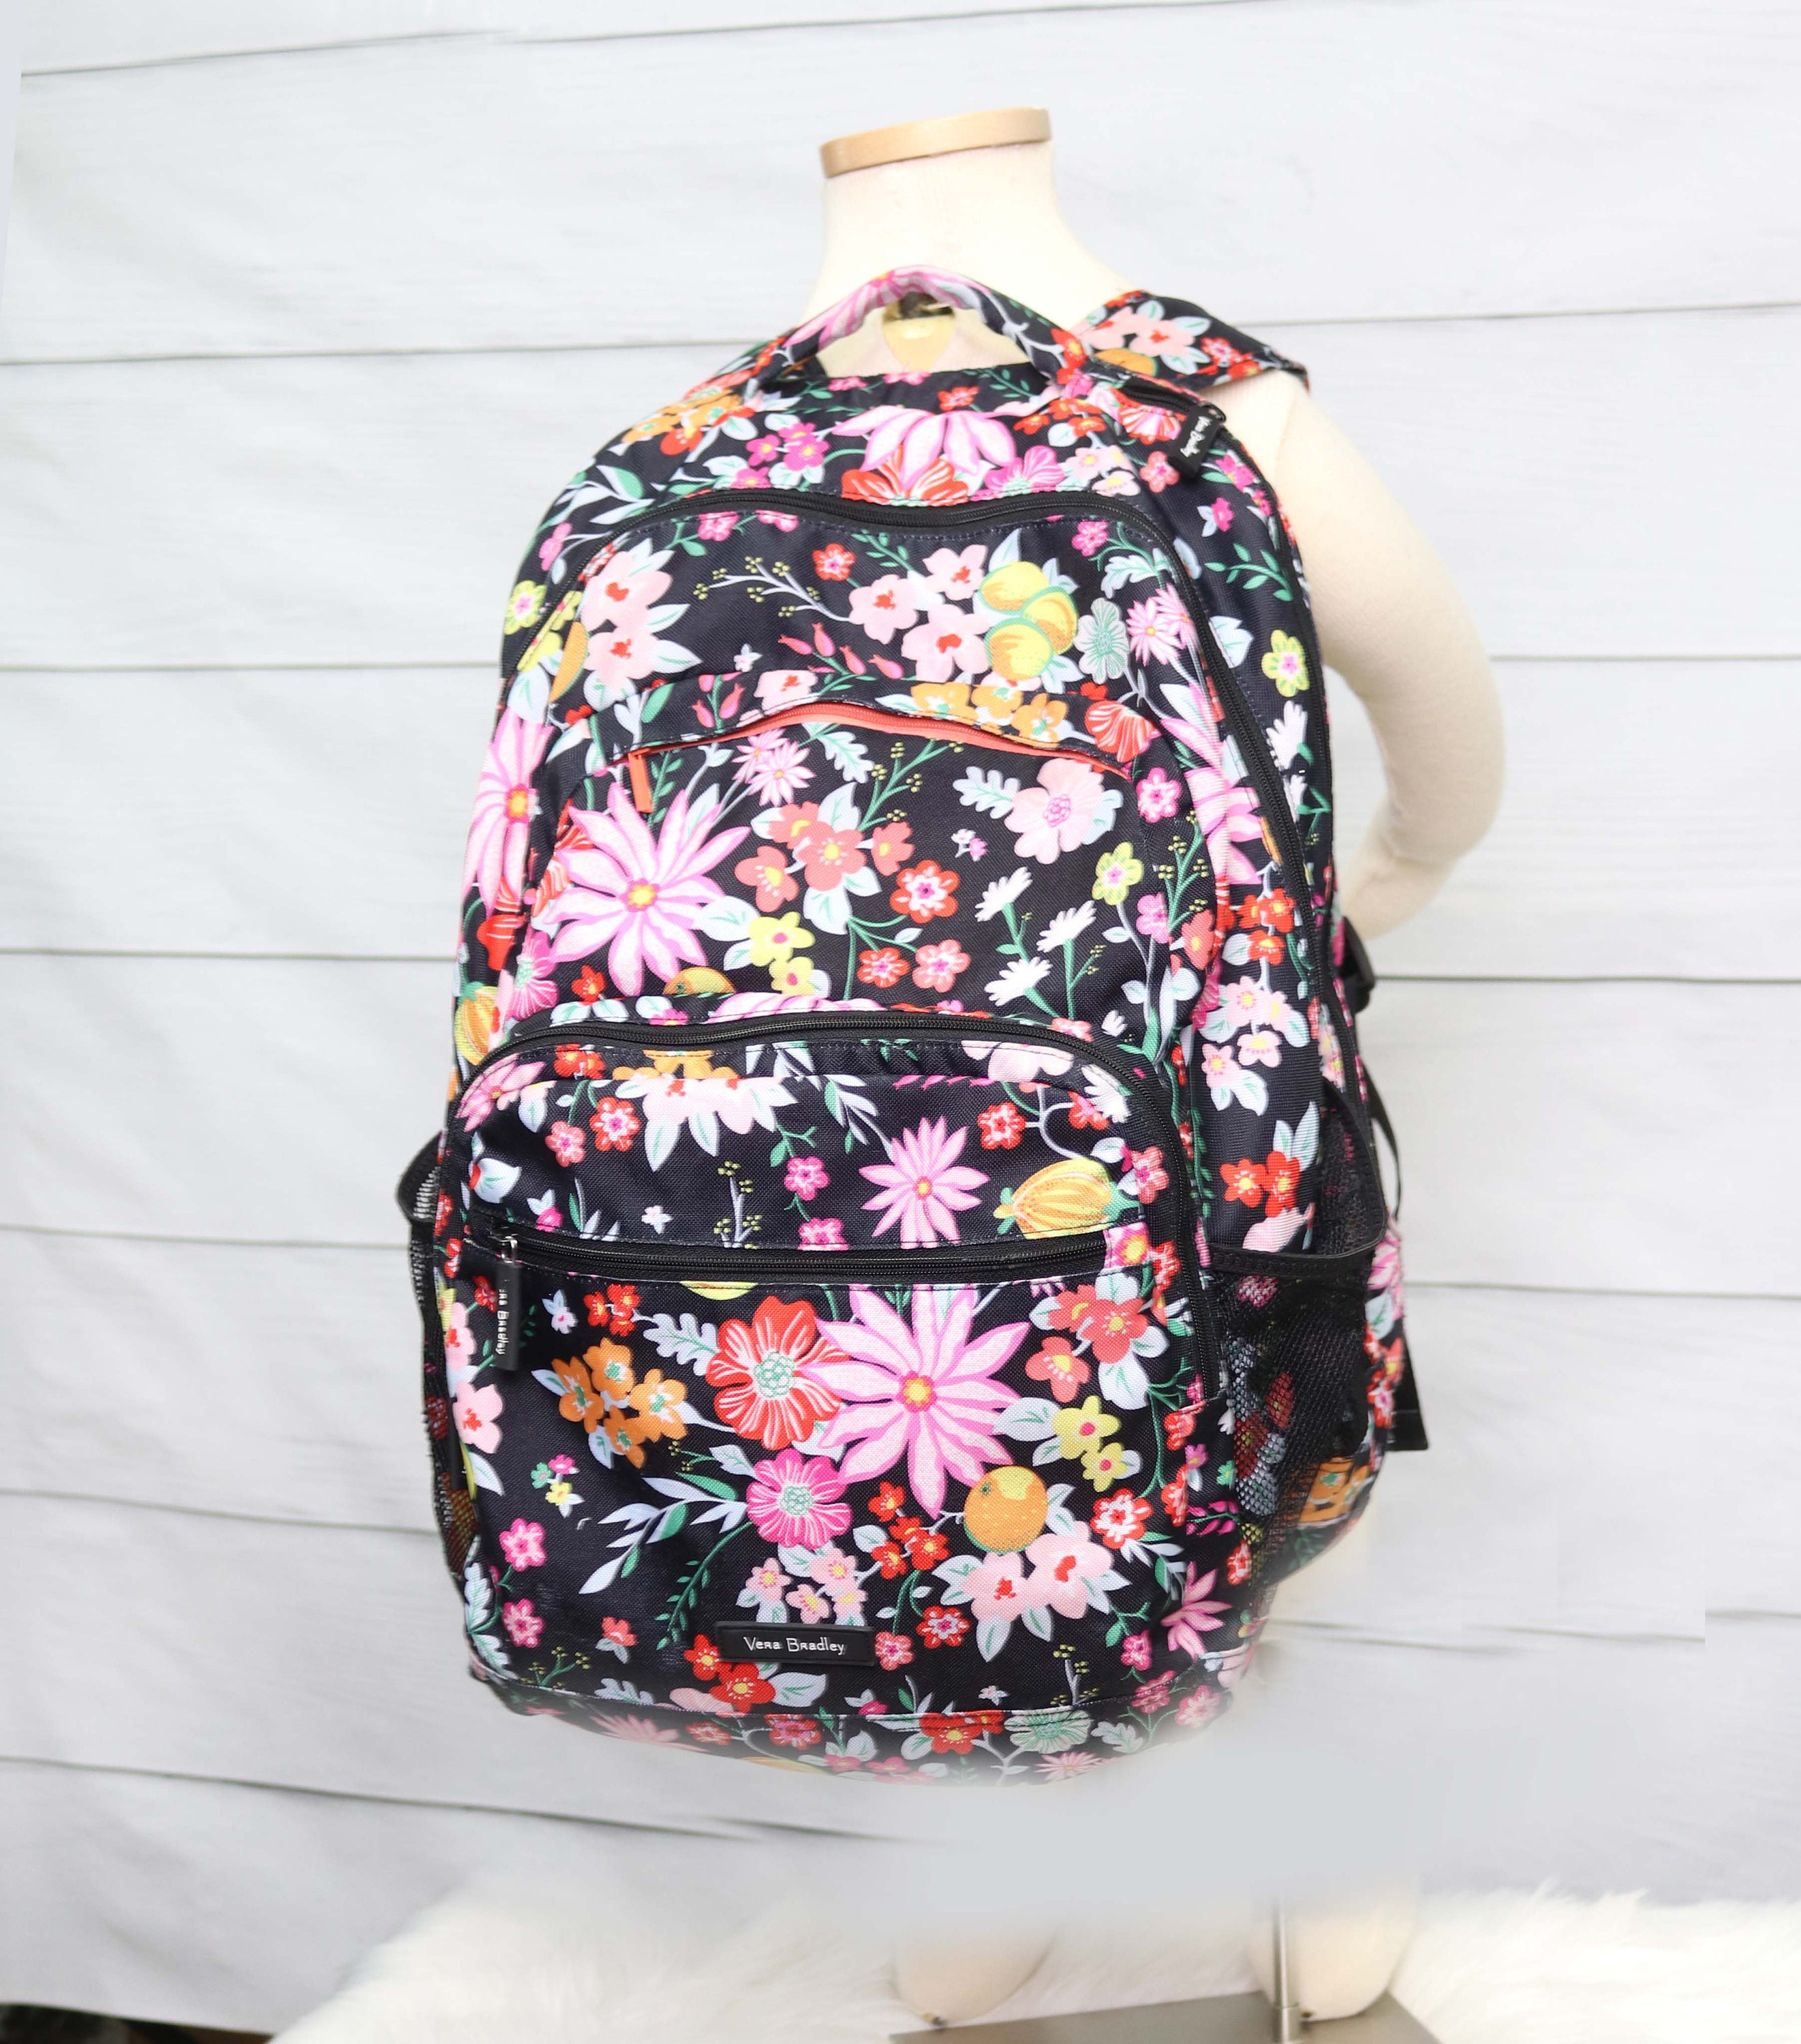 Vera Bradley Floral Backpack With Inside and Outside Zippered Compartments  18 X 13.5 X 7.5, Retired Pattern Backpack, Tech School Bag 